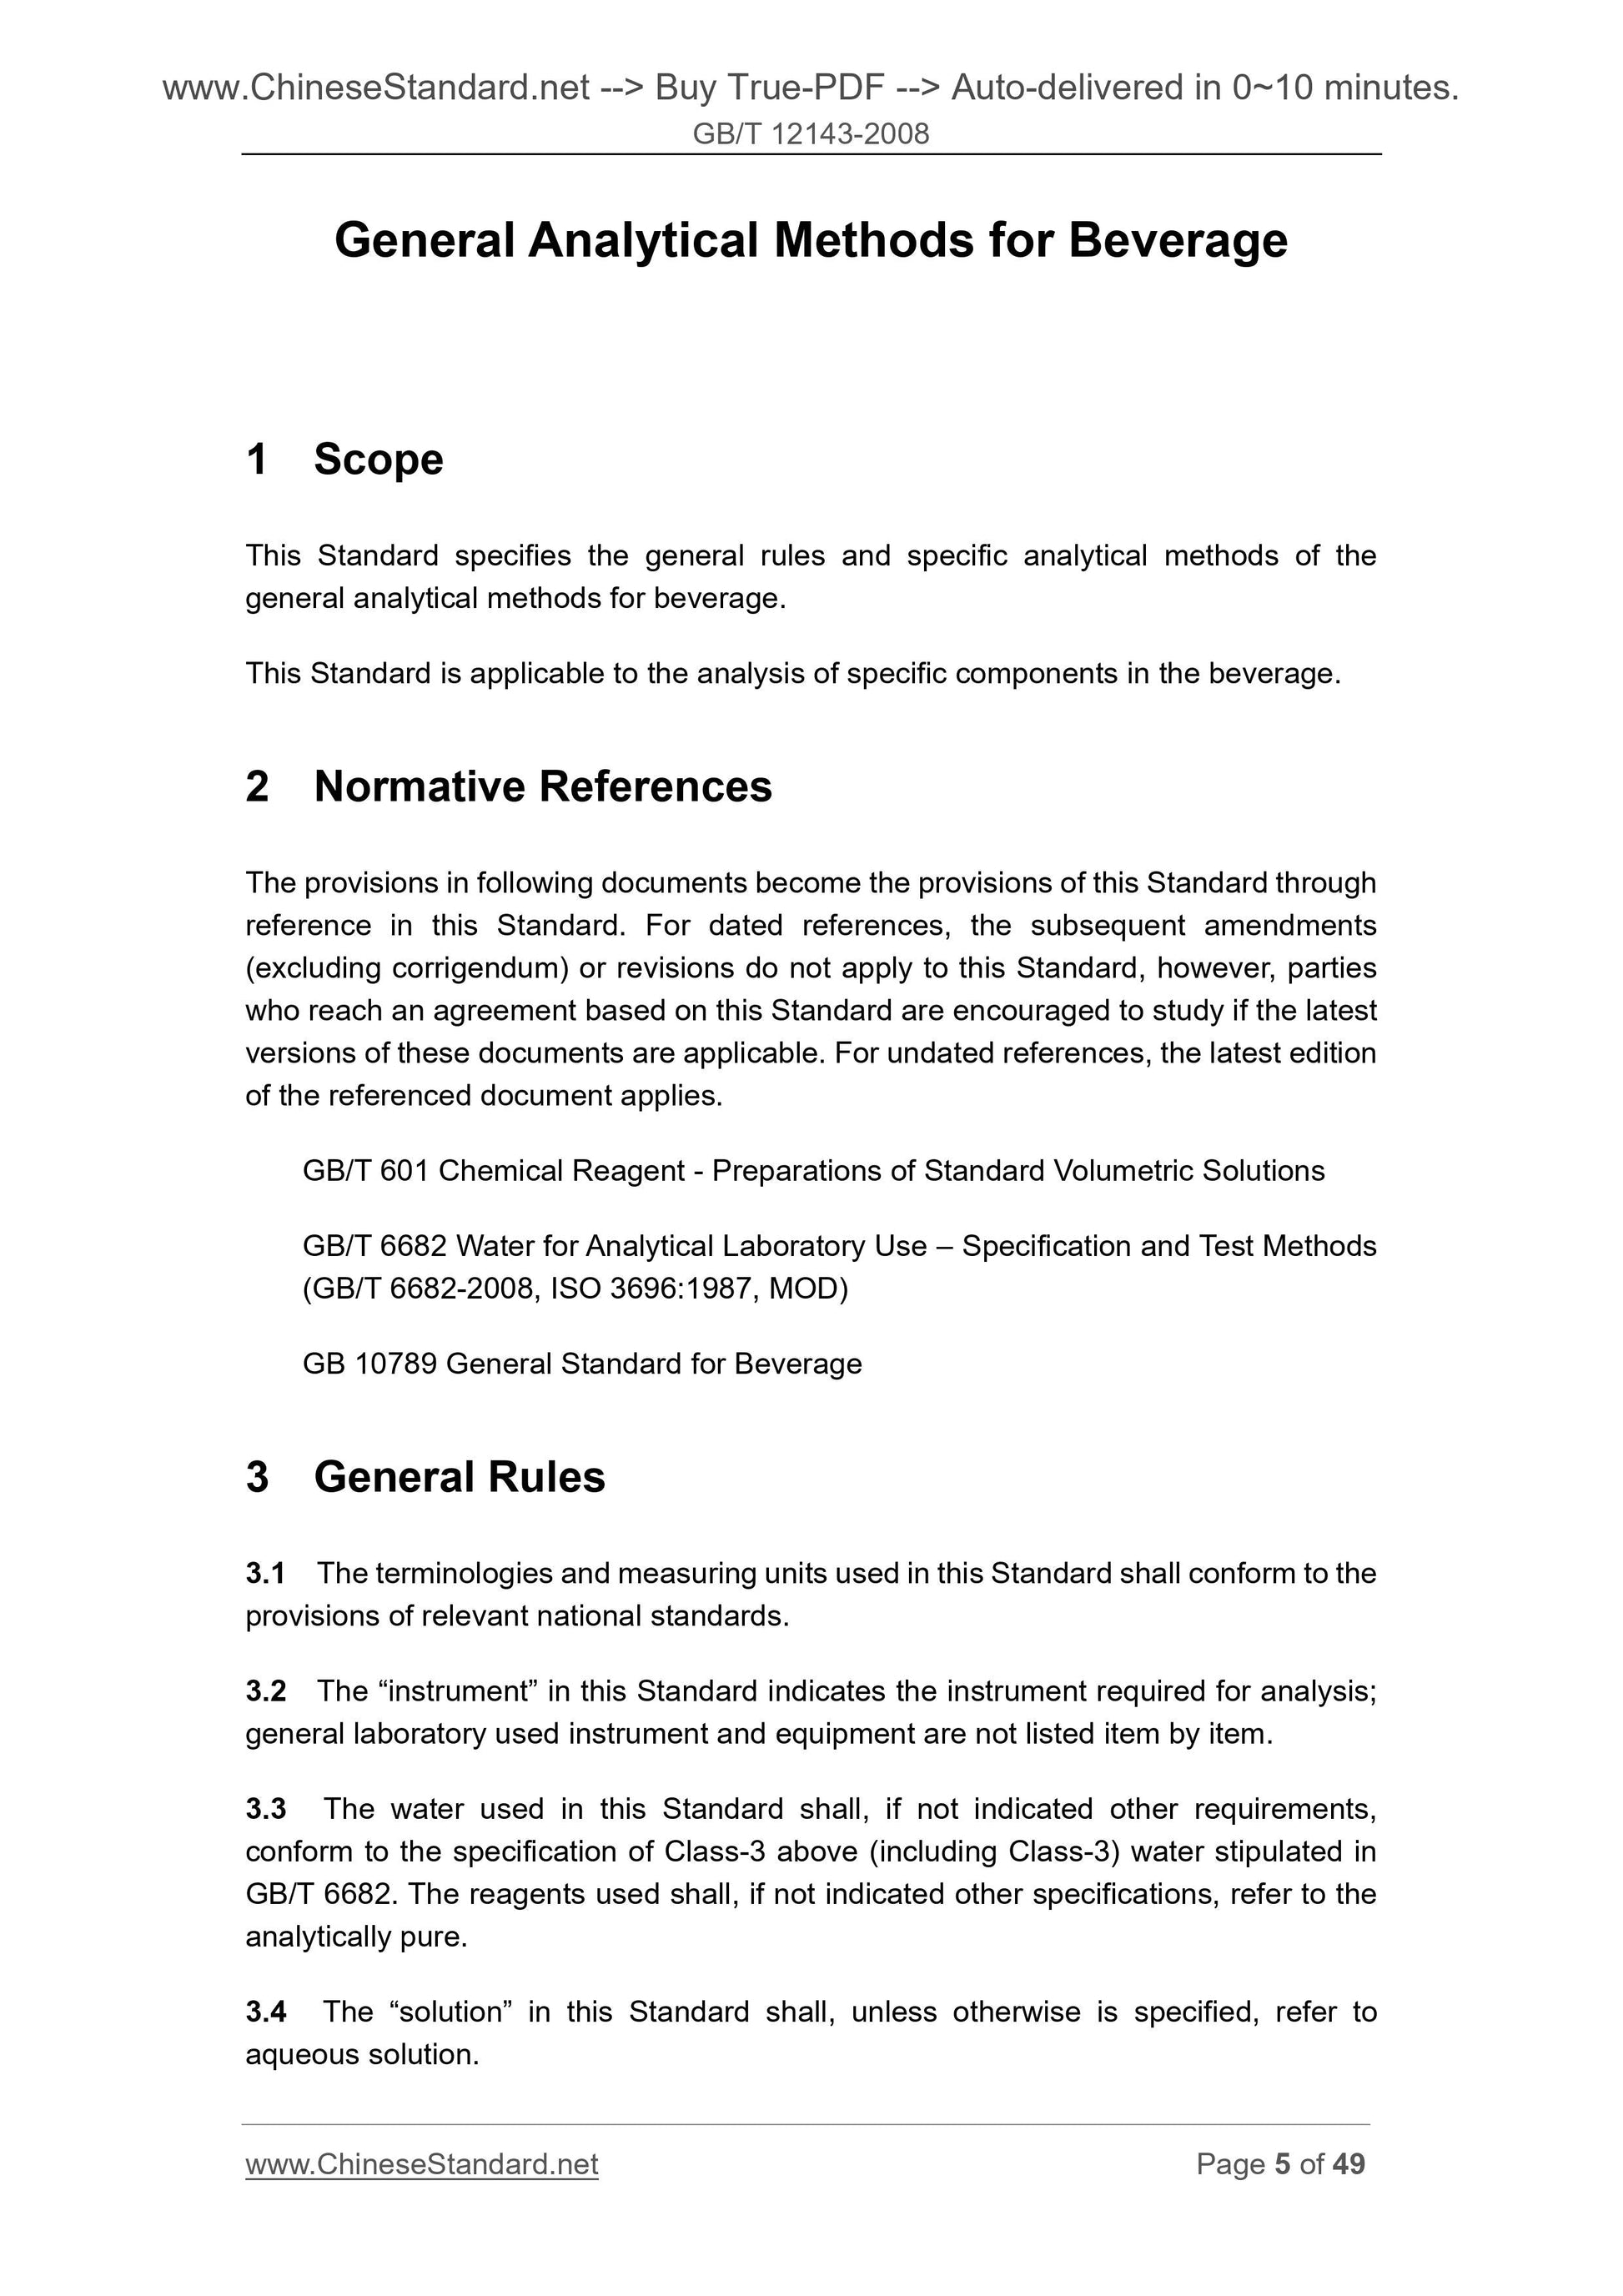 GB/T 12143-2008 Page 4